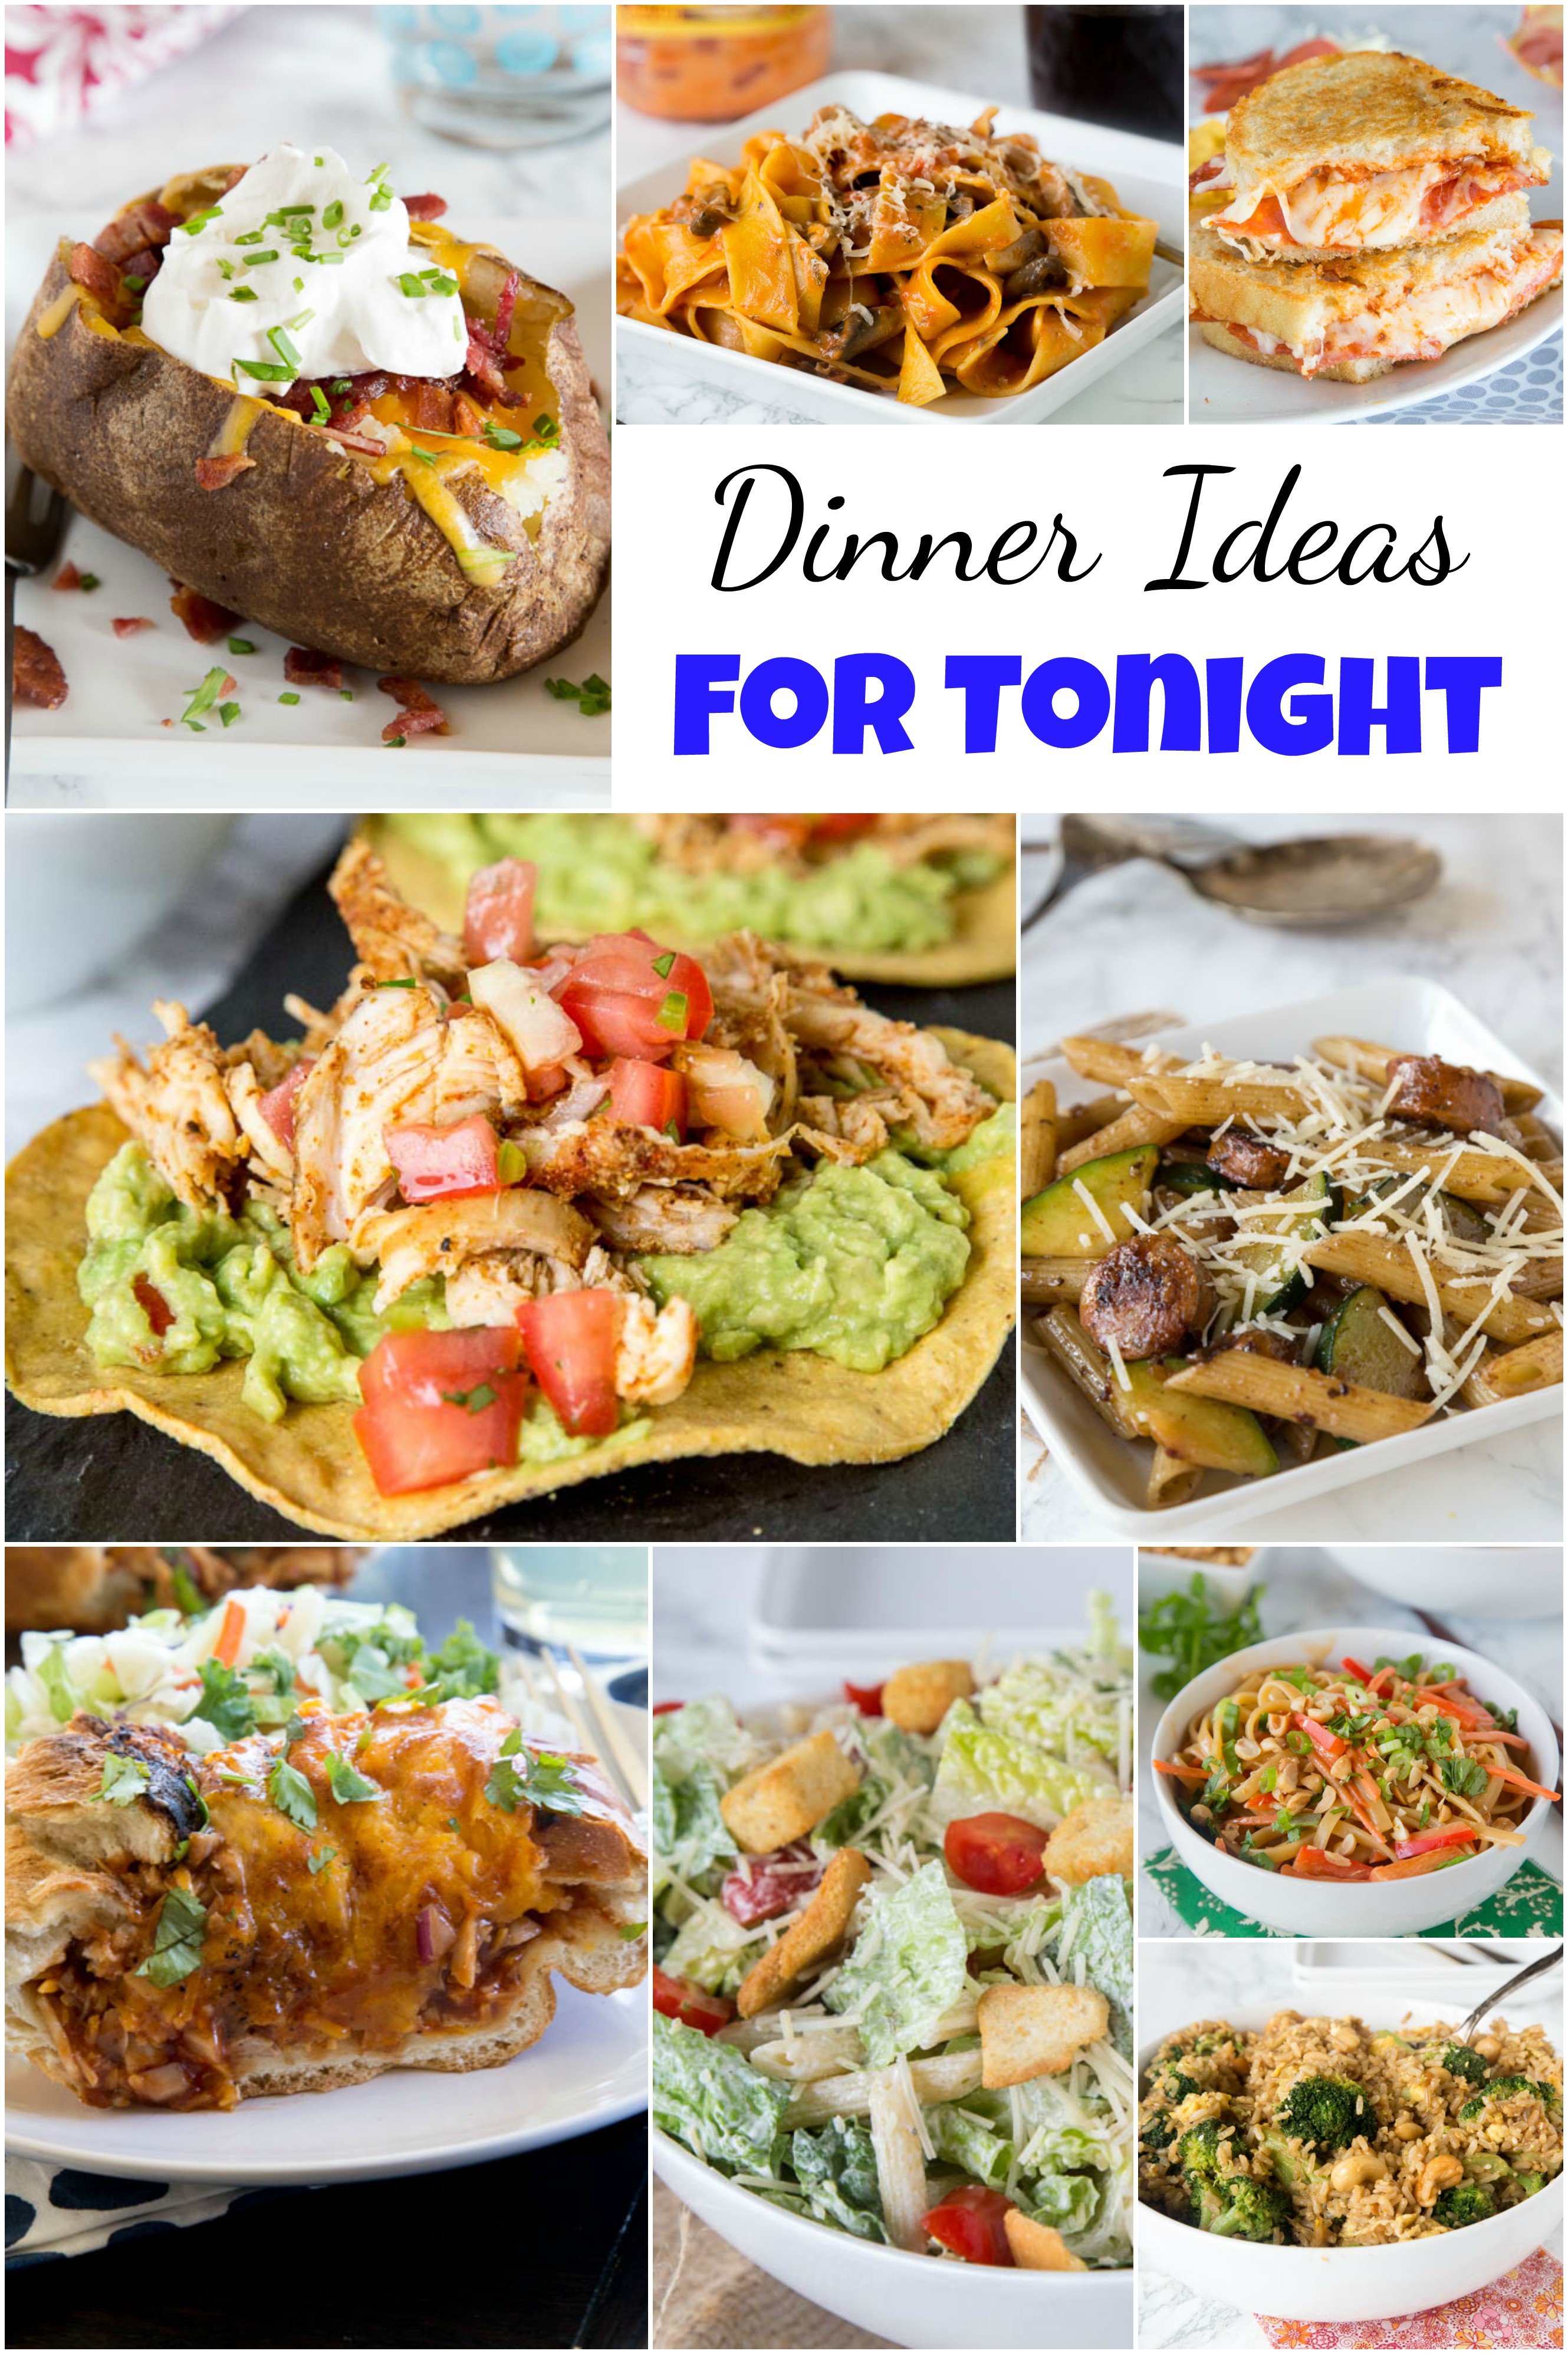 Dinner Ideas for Tonight - Dinners, Dishes, and Desserts